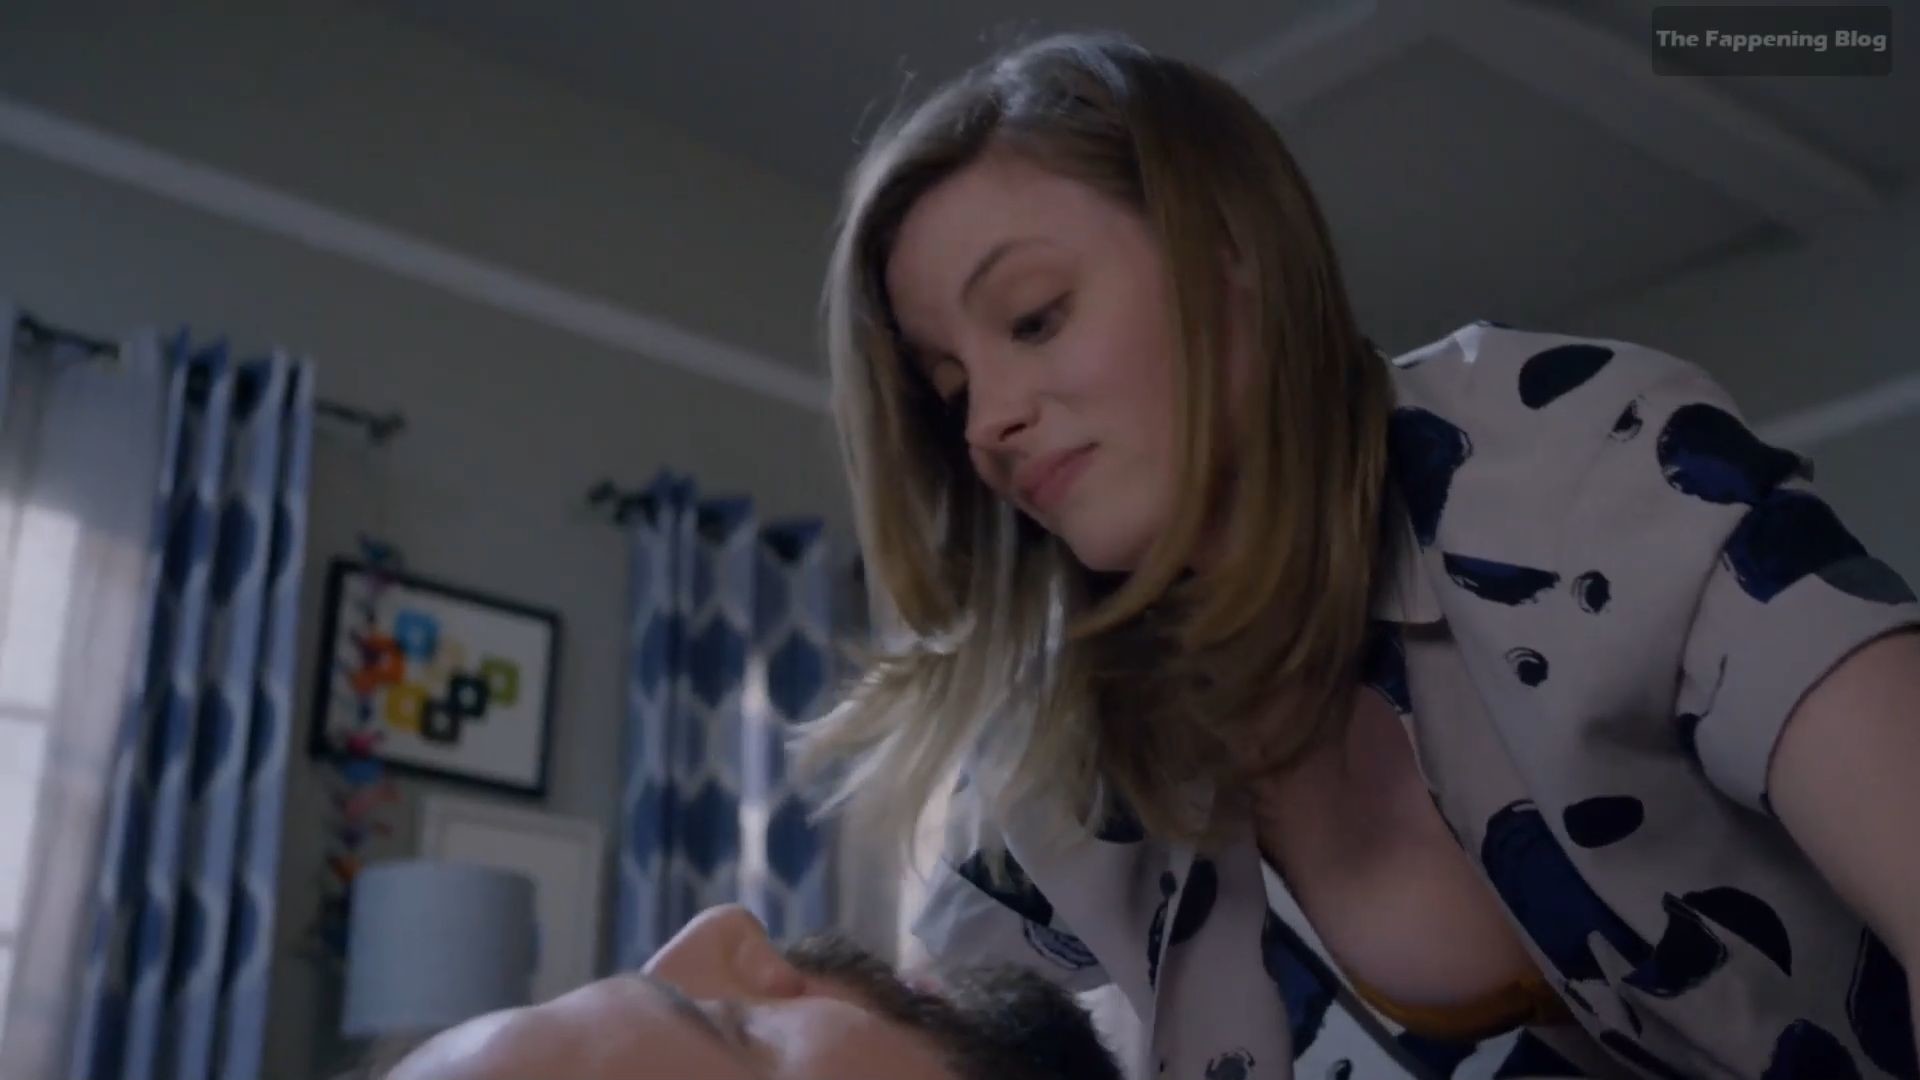 Gillian Jacobs Fappening